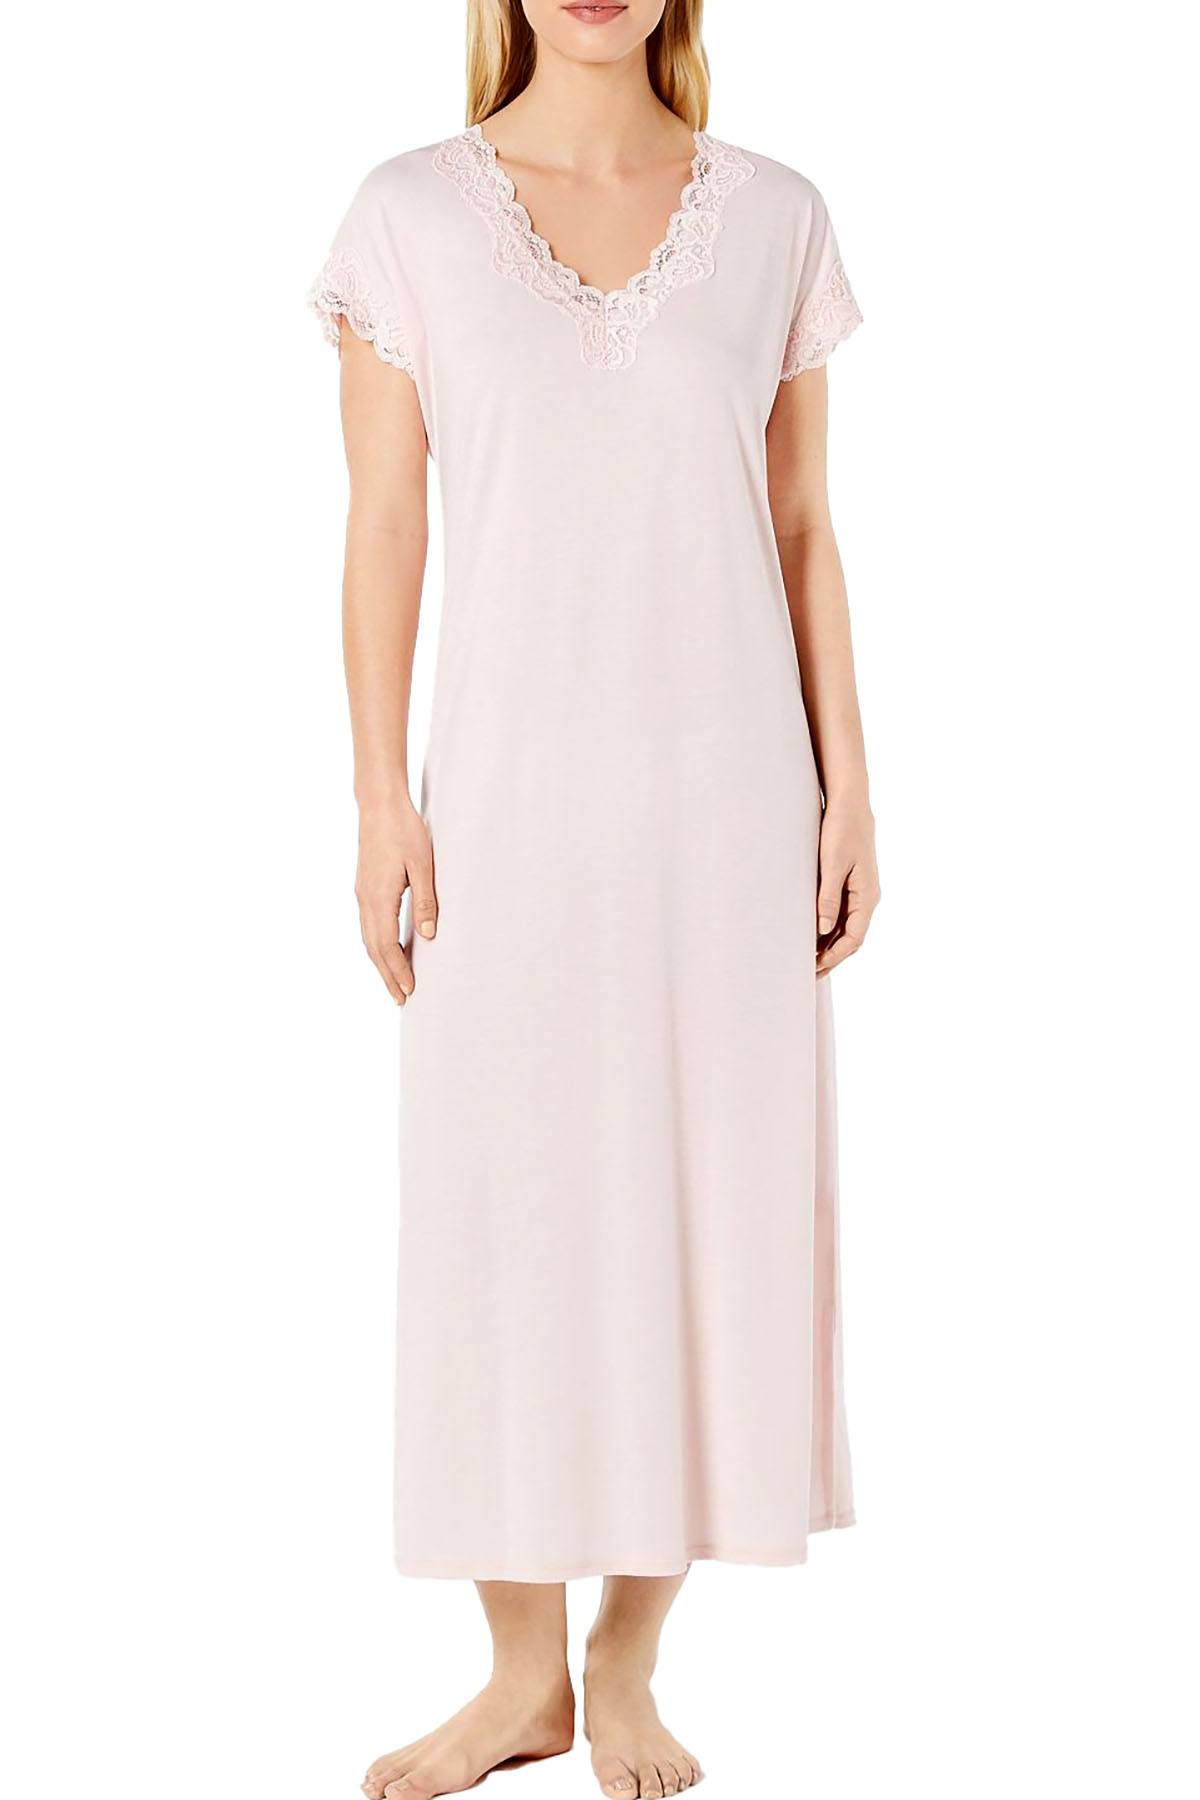 Charter Club Lace Trimmed Soft Modal Knit Nightgown in Potpourri